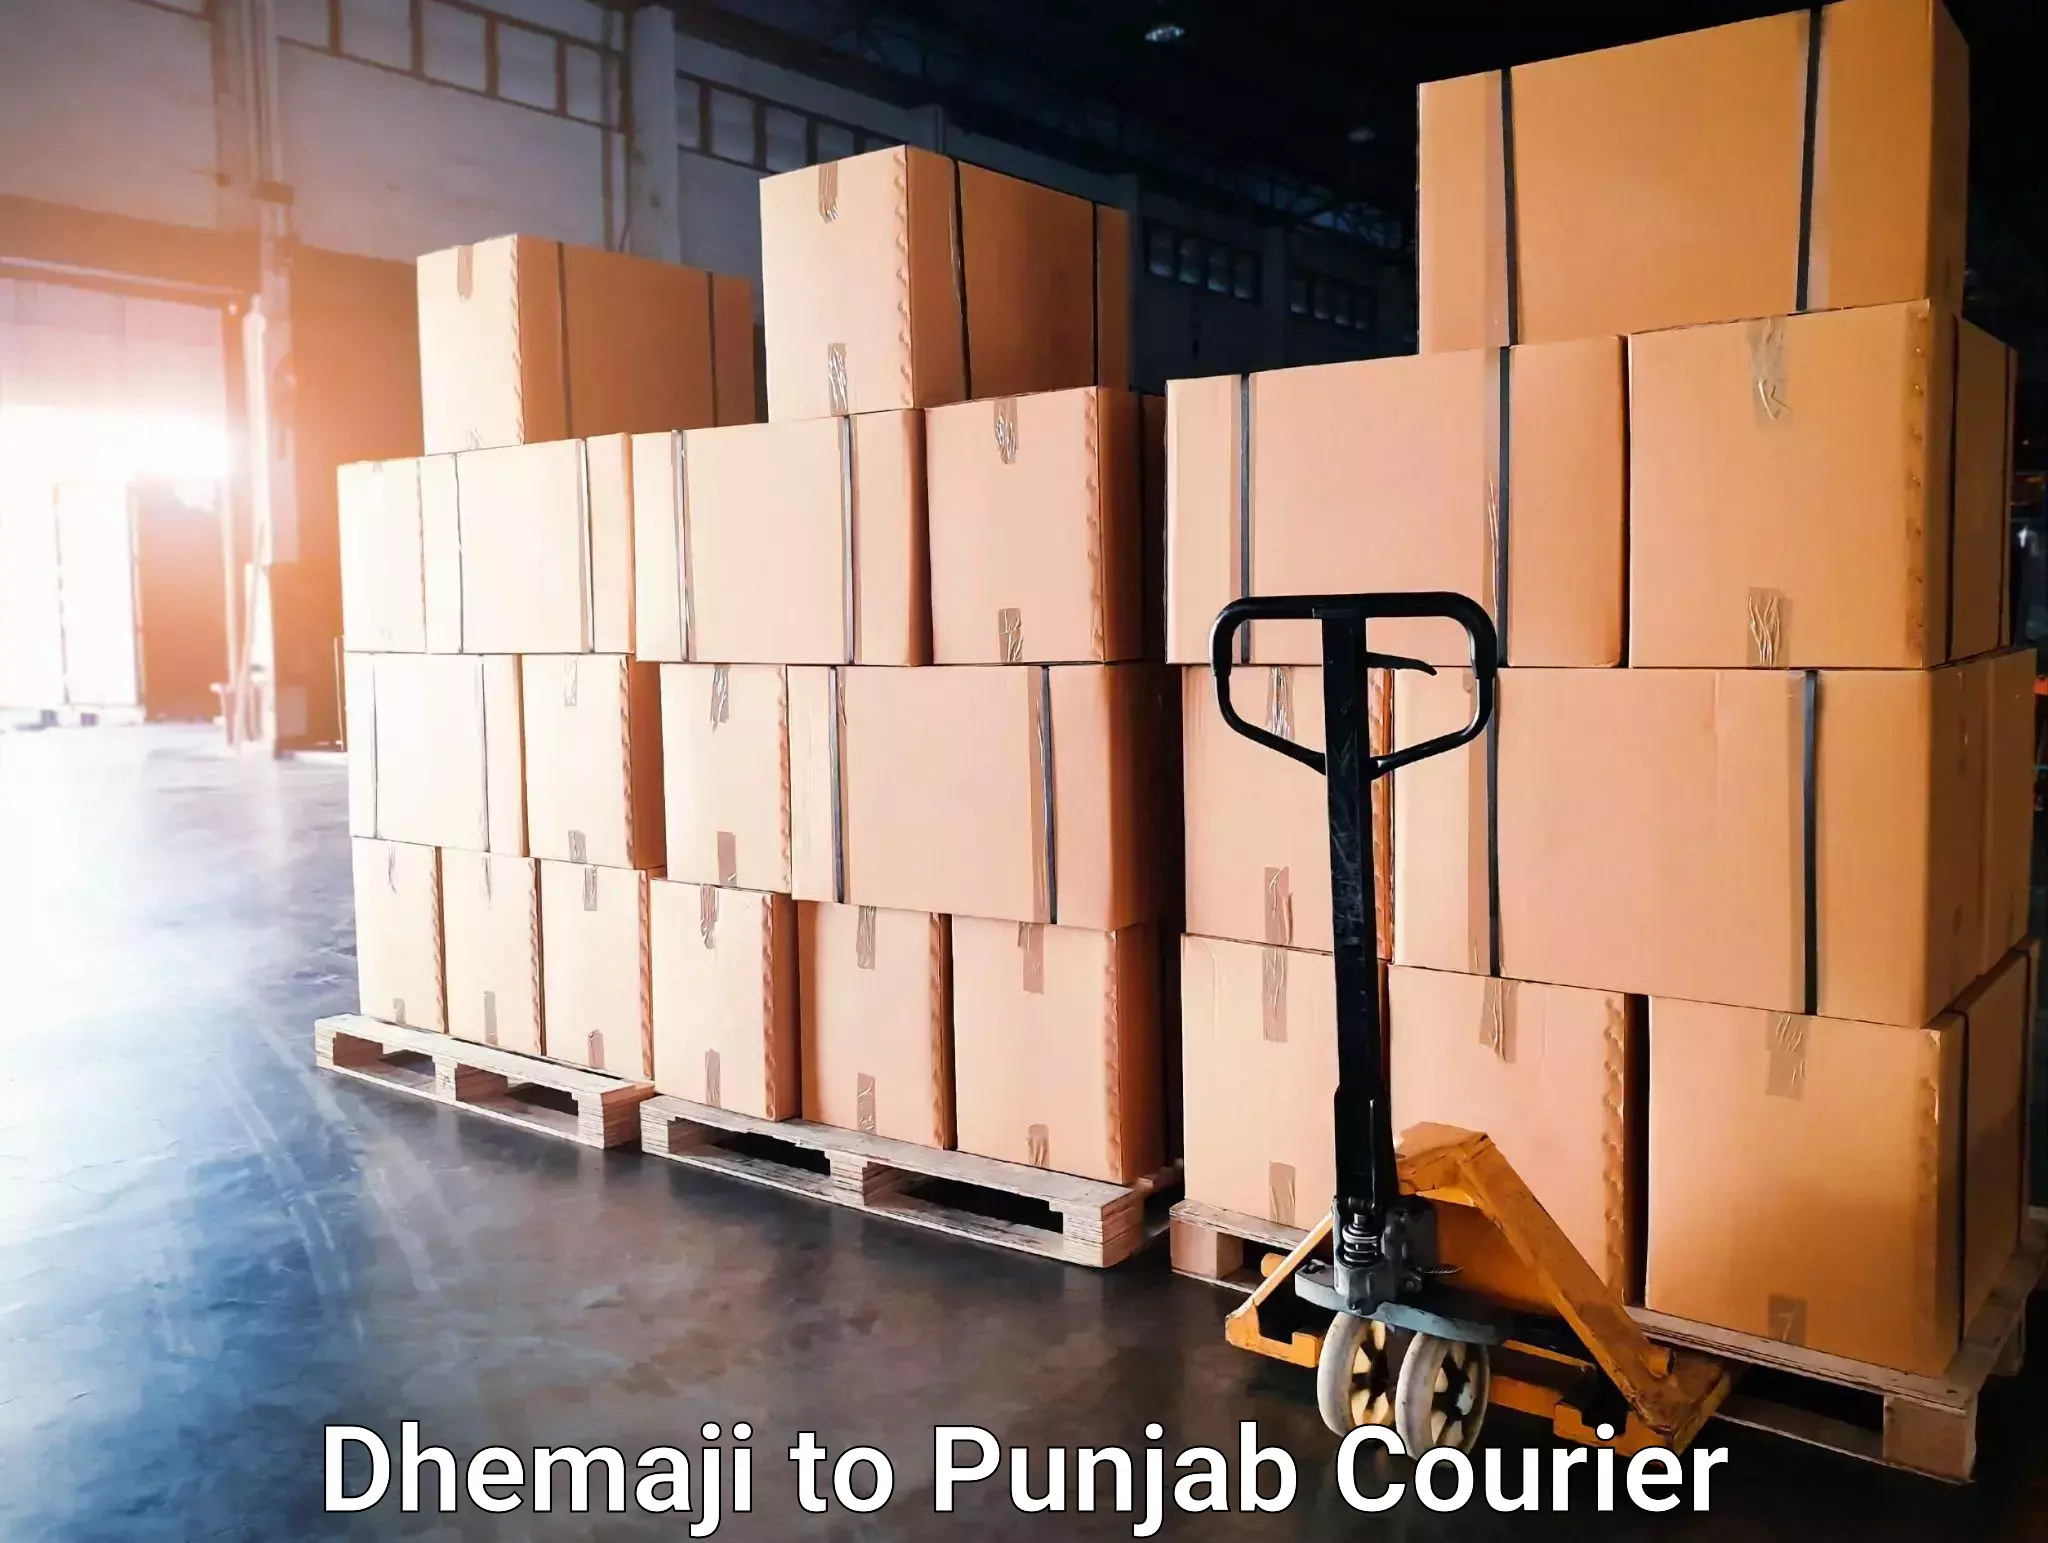 Courier service efficiency Dhemaji to Mohali